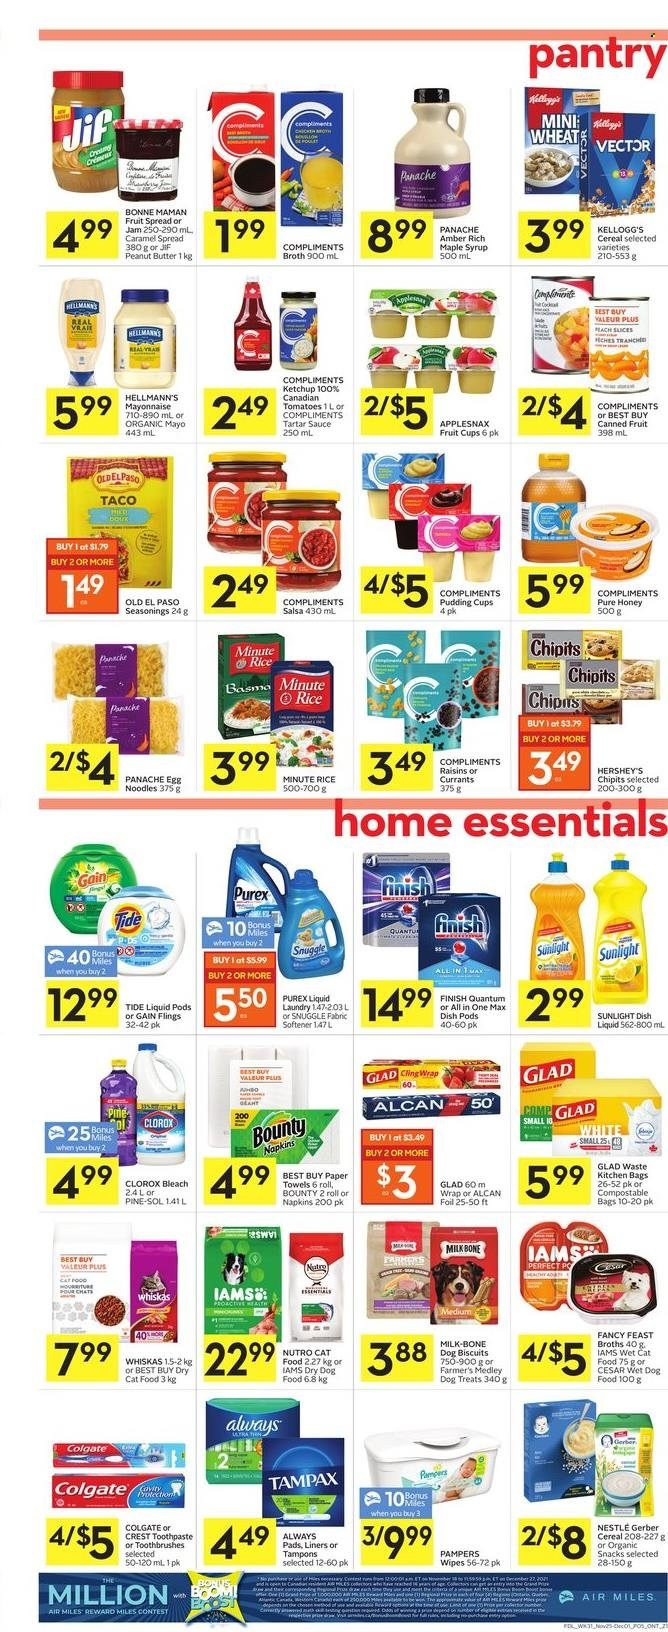 thumbnail - Foodland Flyer - November 25, 2021 - December 01, 2021 - Sales products - Old El Paso, tomatoes, noodles, pudding, milk, mayonnaise, tartar sauce, Hellmann’s, Hershey's, snack, Bounty, Kellogg's, Gerber, broth, cereals, rice, egg noodles, caramel, salsa, maple syrup, honey, fruit jam, peanut butter, syrup, Jif, currants, Nestlé, Colgate, Tampax, ketchup, Pampers, Whiskas. Page 5.